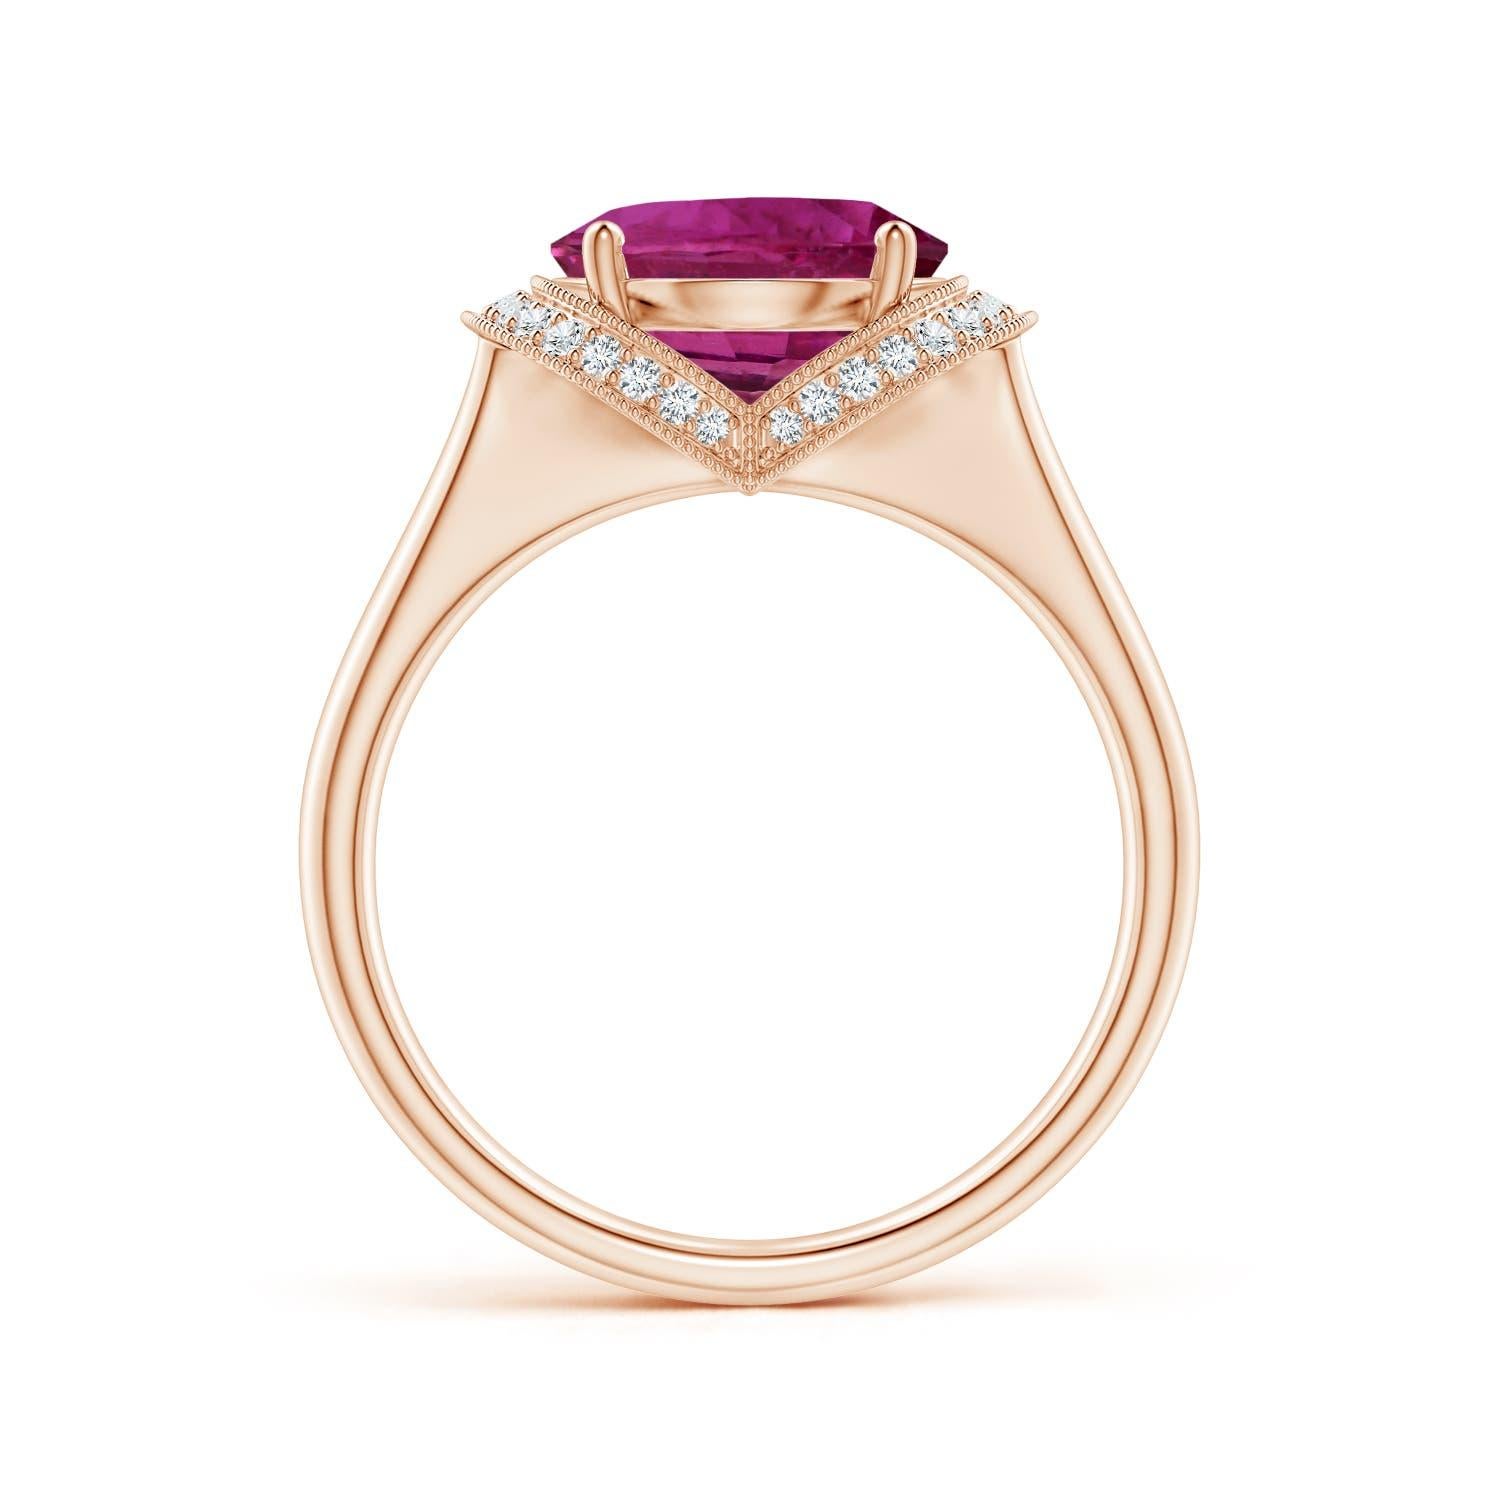 For Sale:  Angara Gia Certified Pink Sapphire Ring in Rose Gold with Diamond Half Halo 2